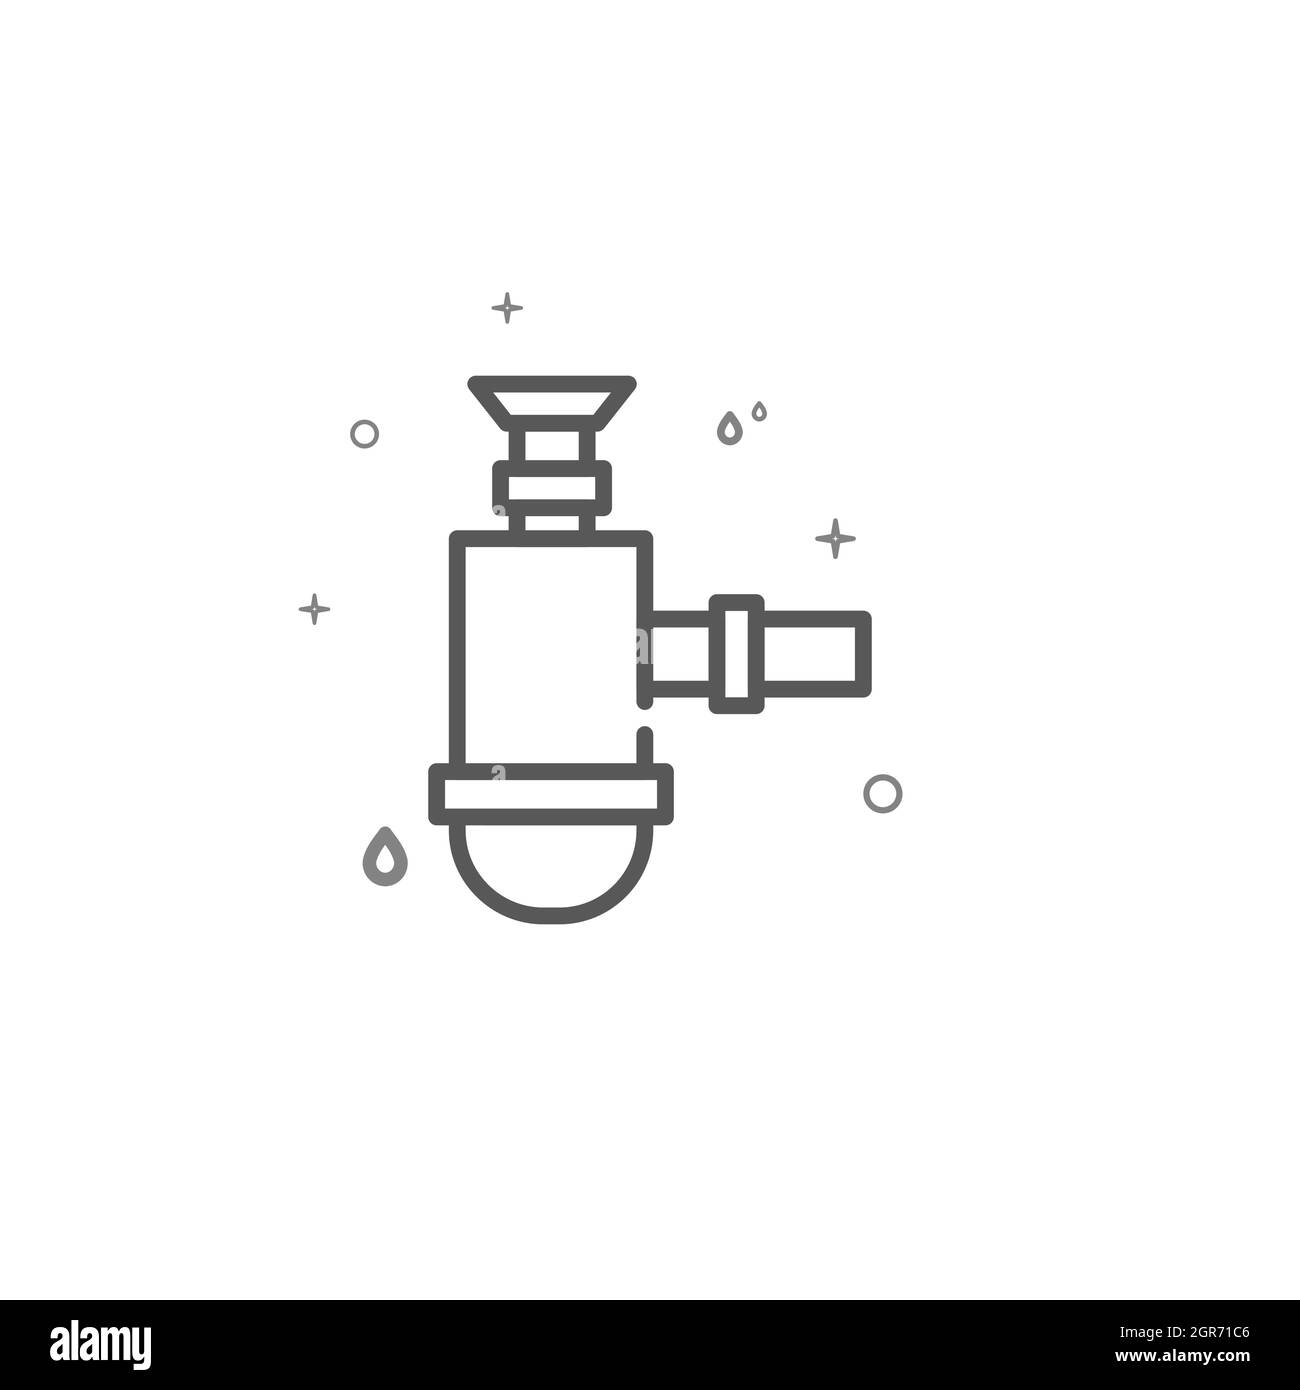 Sink siphon simple vector line icon. Plumbing symbol, pictogram, sign isolated on white background. Editable stroke. Adjust line weight. Stock Vector